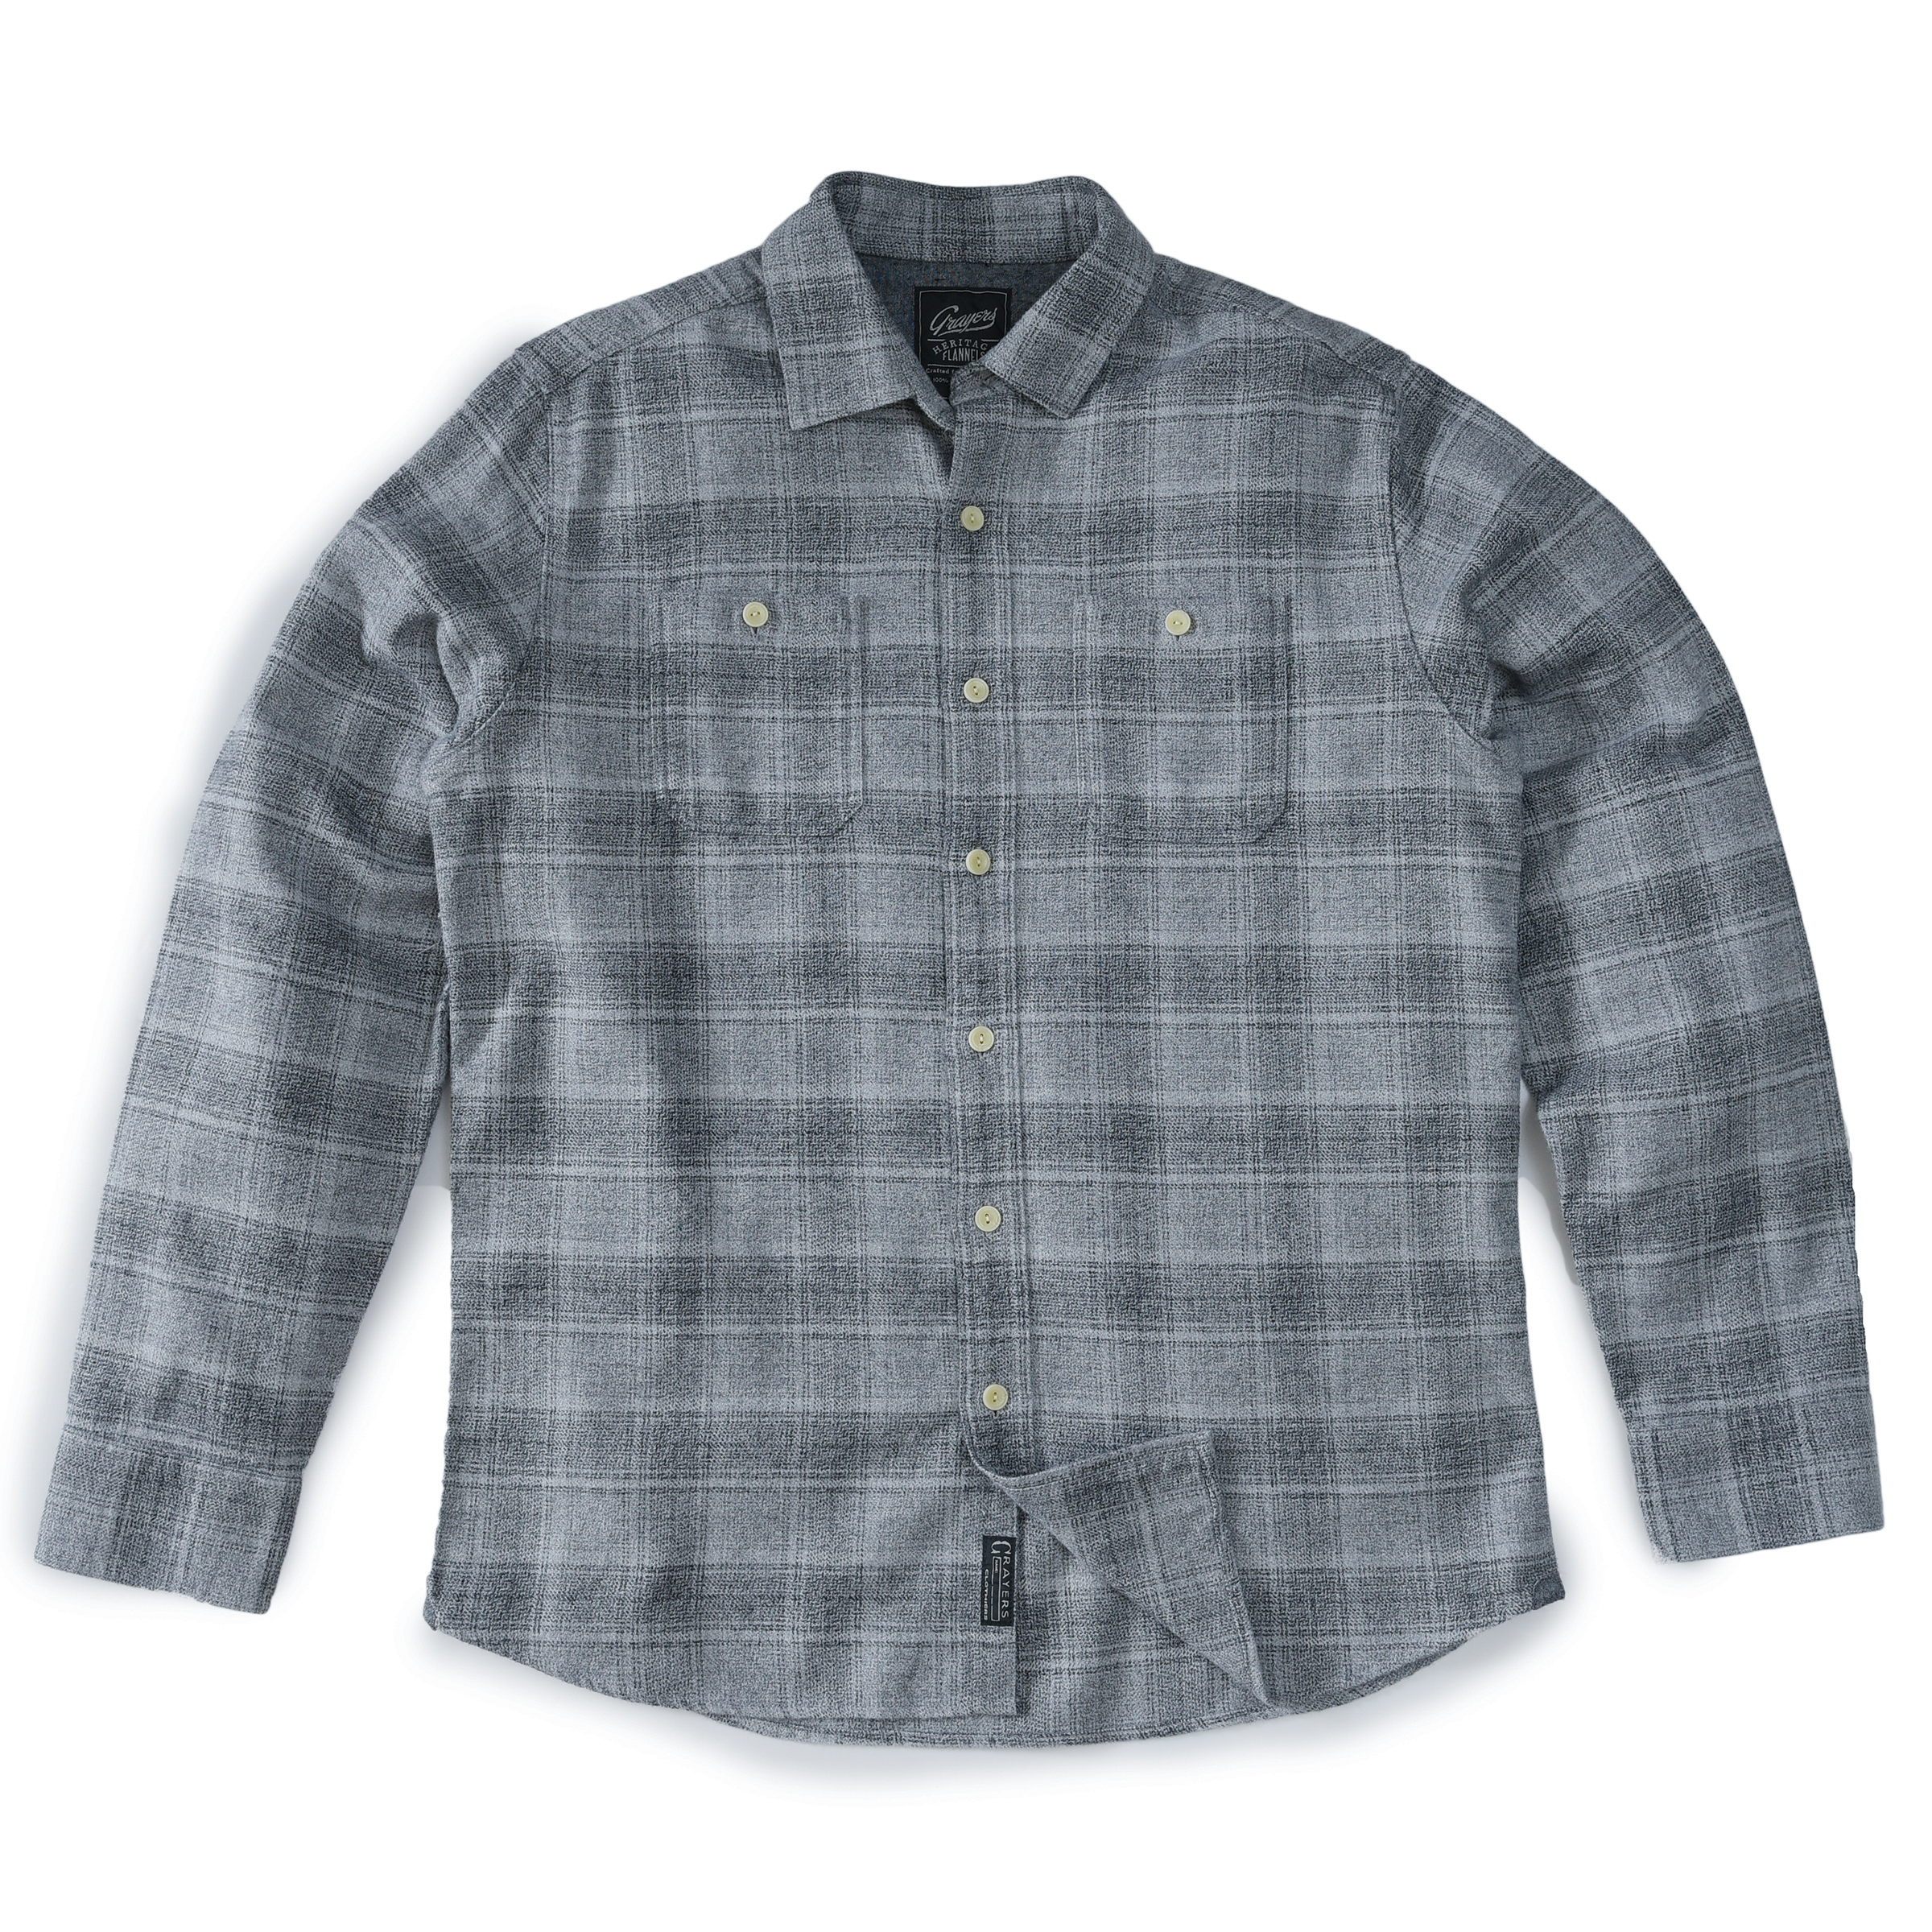 W007117GRY - Charles Heritage Flannel RM7_1330rr.jpg